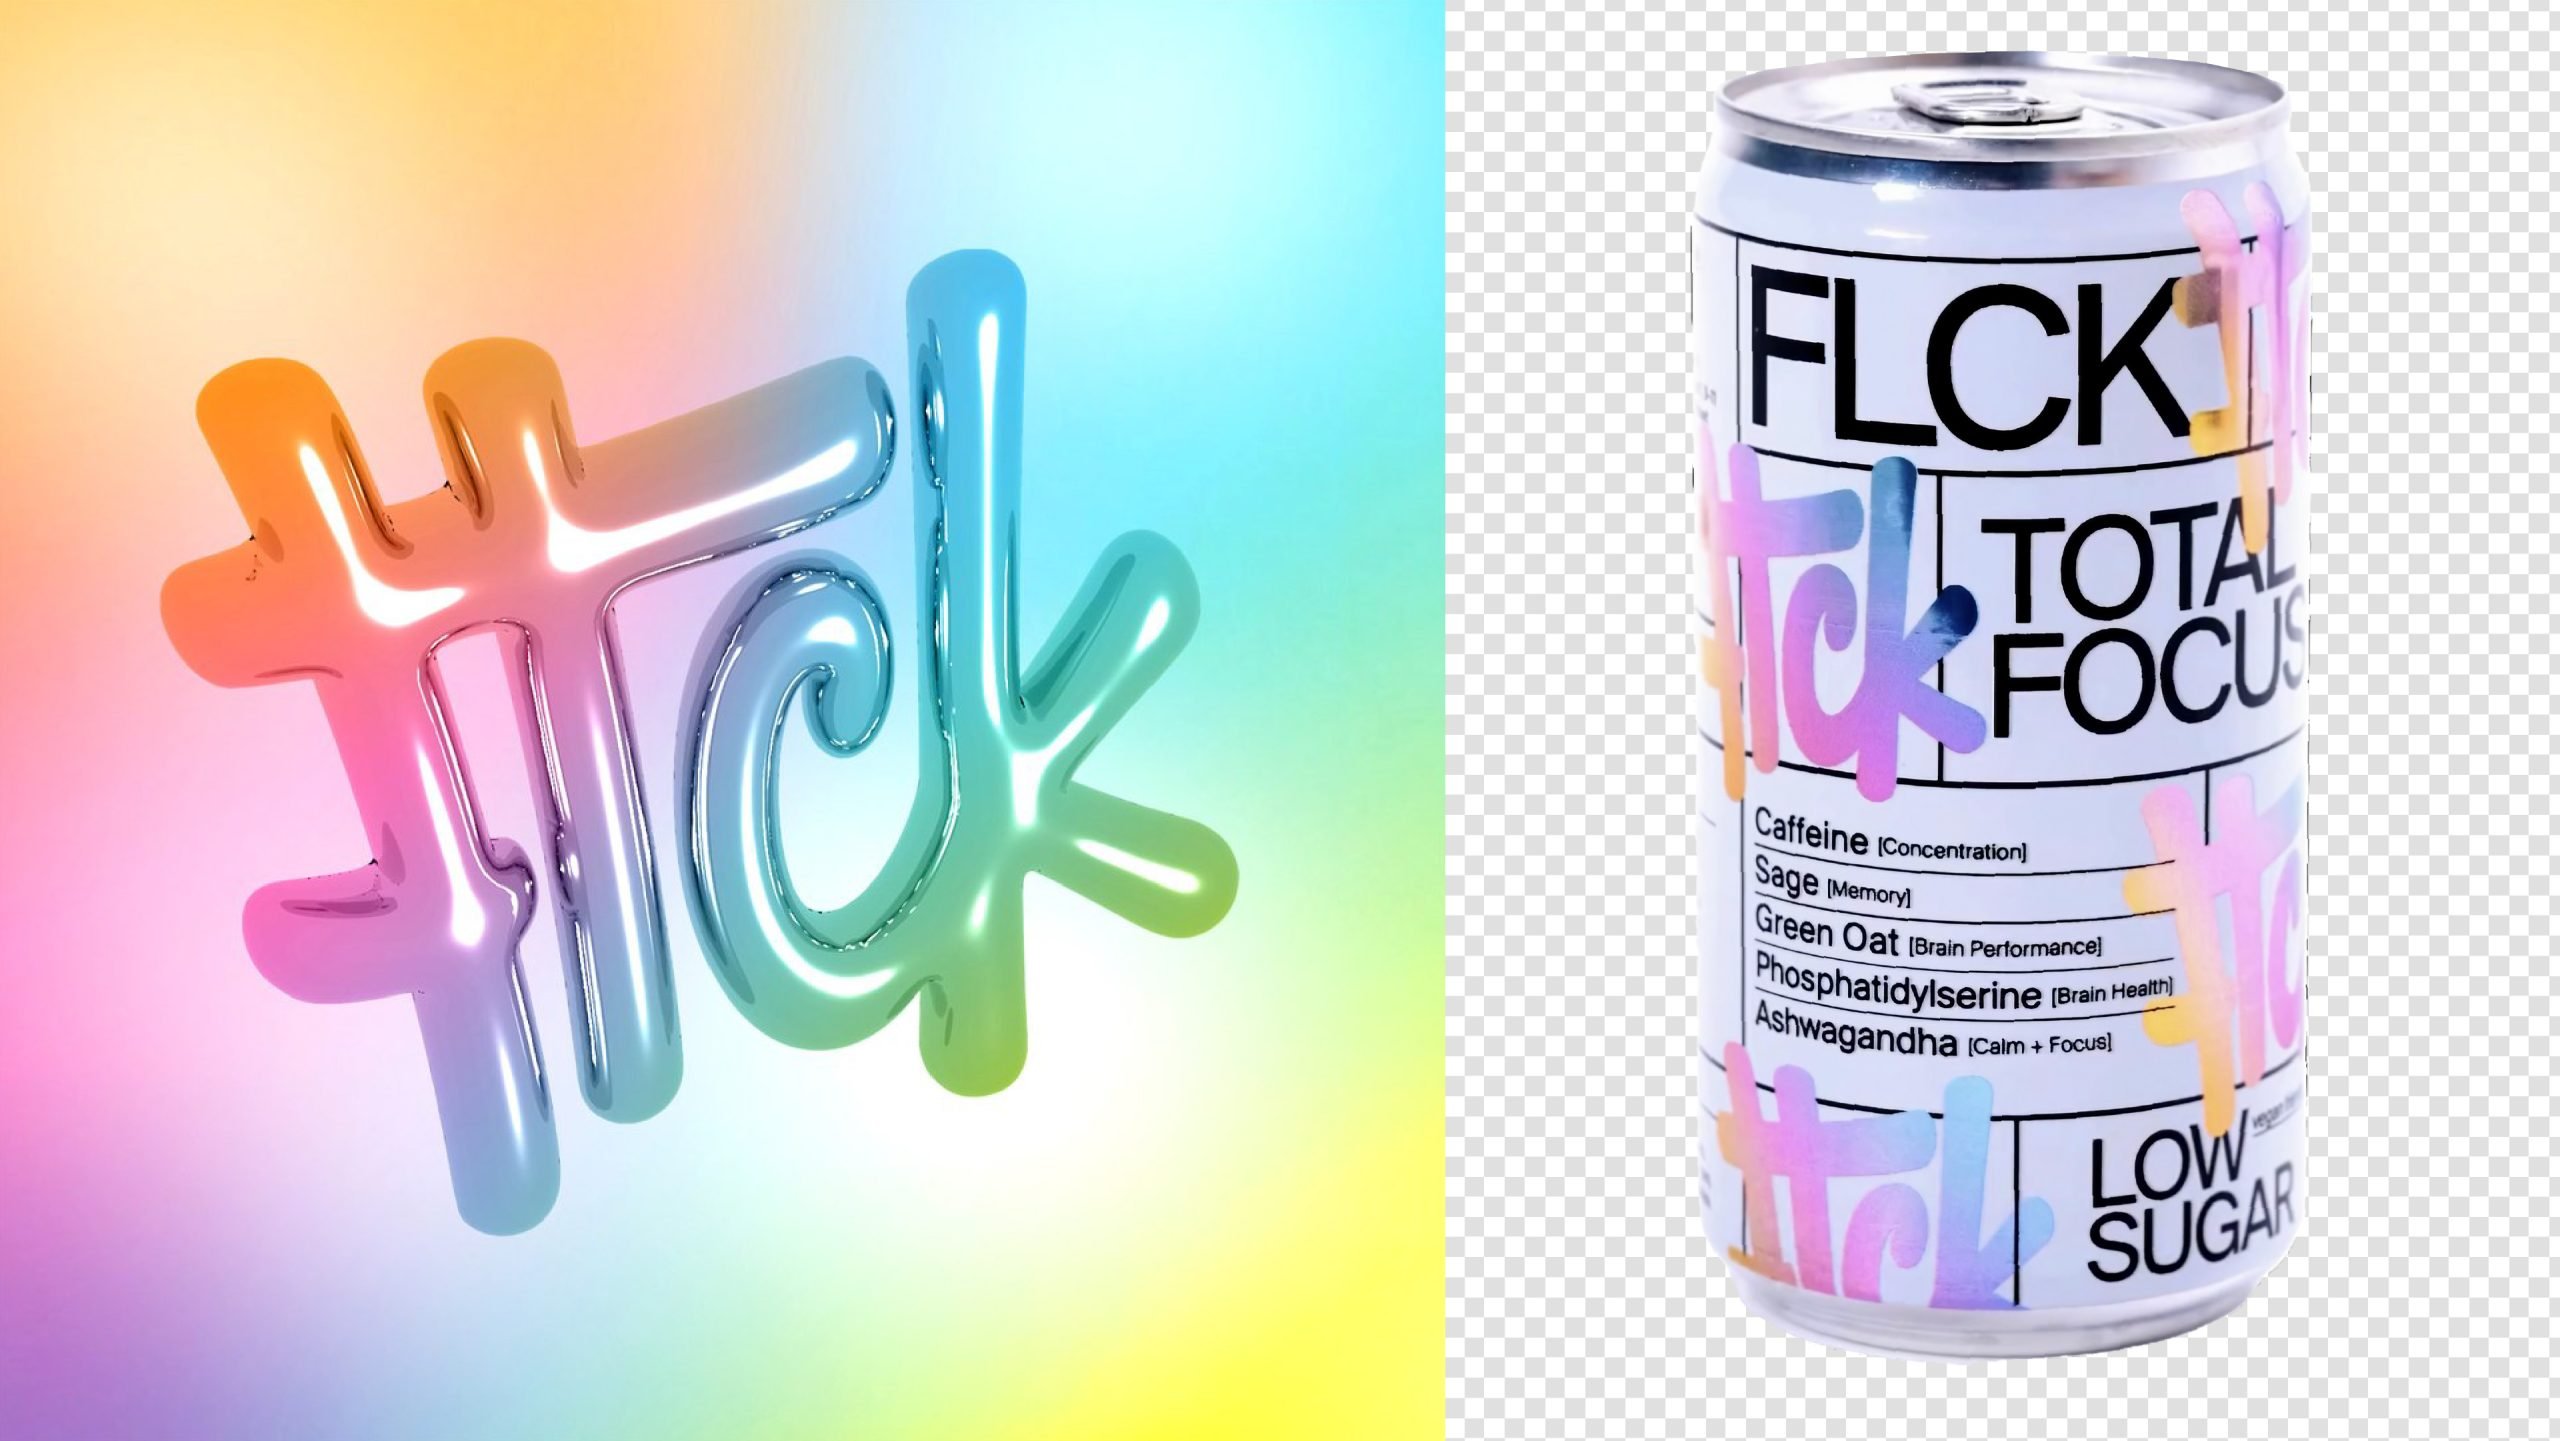 FLCK Gets Futuristic With Graffiti-Inspired Packaging For Energy Drink Brand Total Focus